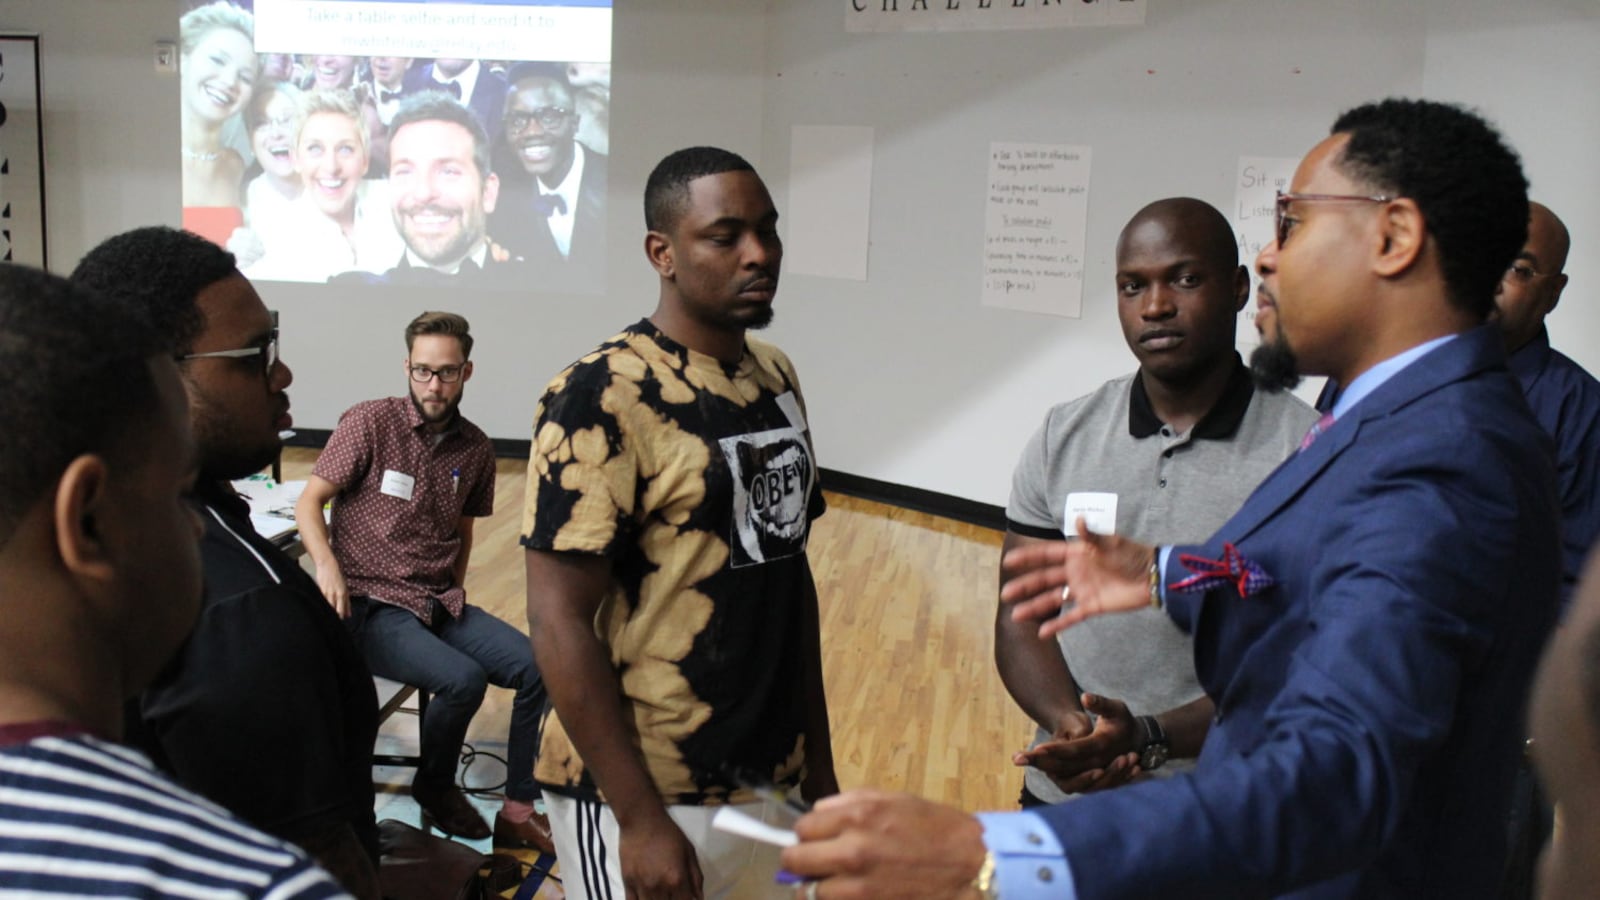 Founder Patrick Washington discusses his program Man Up with current Relay Graduate School of Education participants. The program aims to partner with Relay to train more male teachers of color.